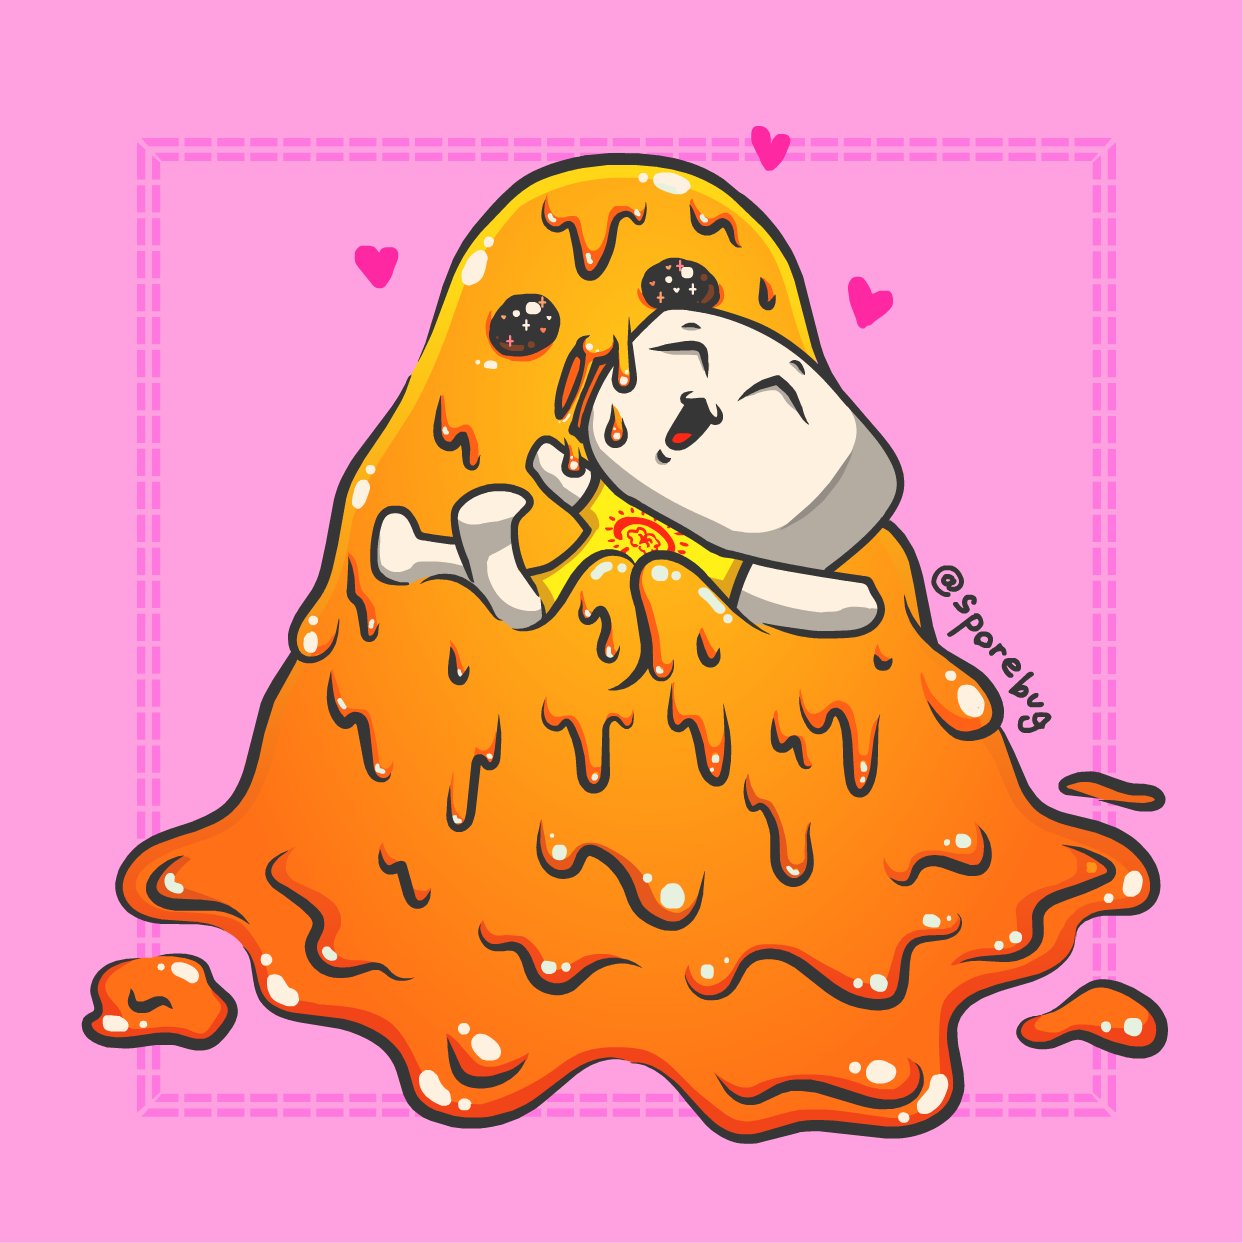 🍄🐛 on X: SCP 999 + TheRubber fanart thing 🍊🧡   / X